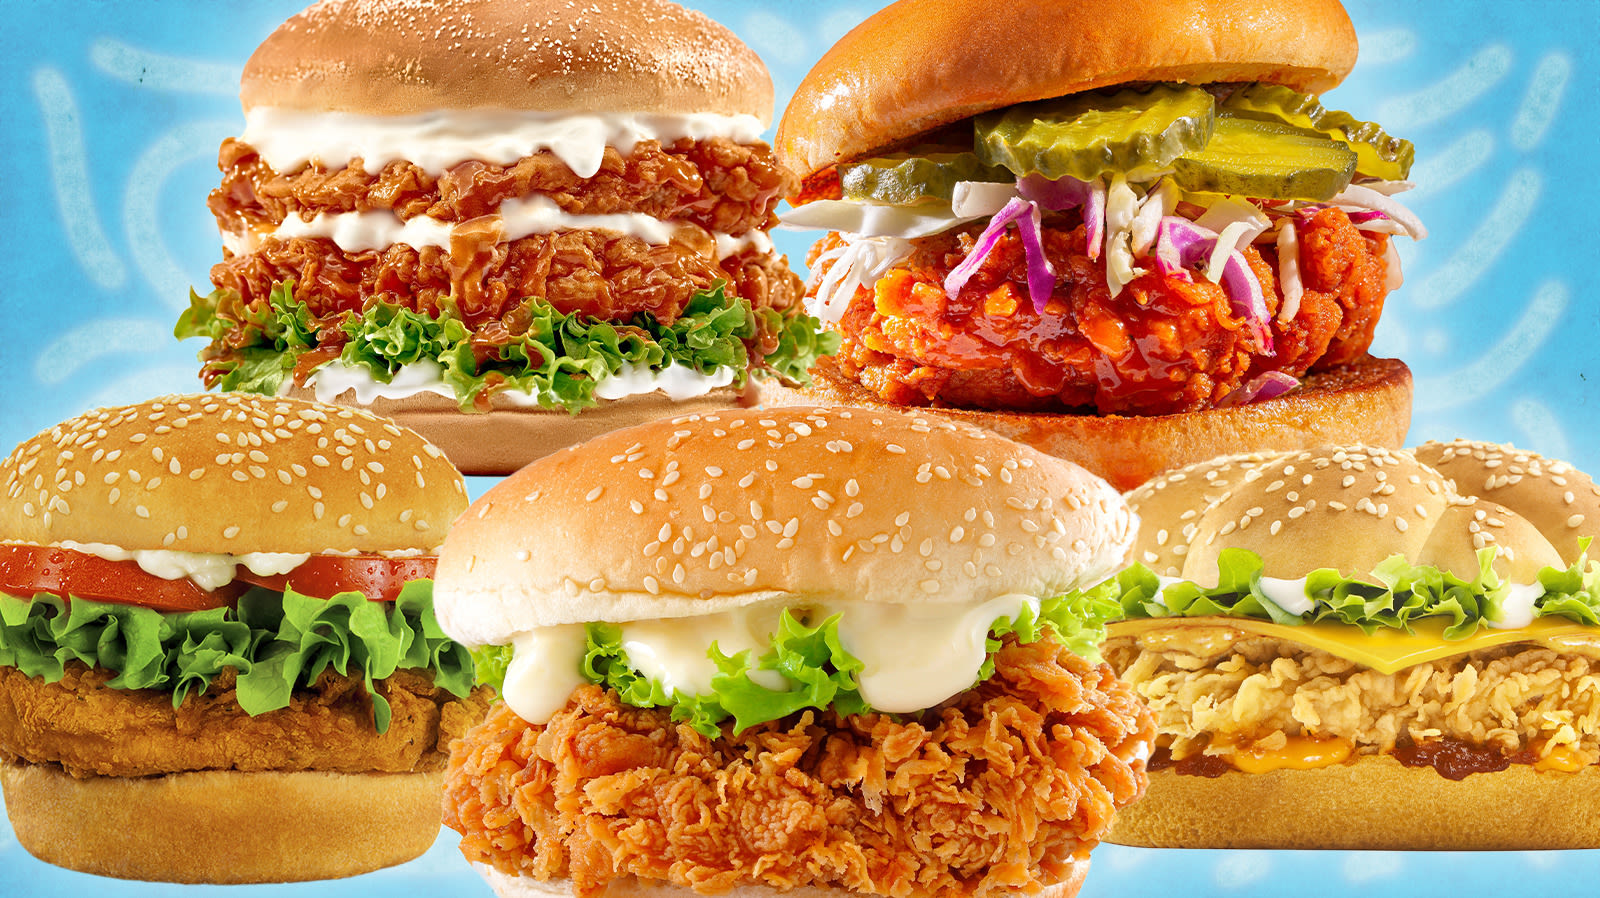 Chicken Sandwiches Are The Best Fast Food Menu Item